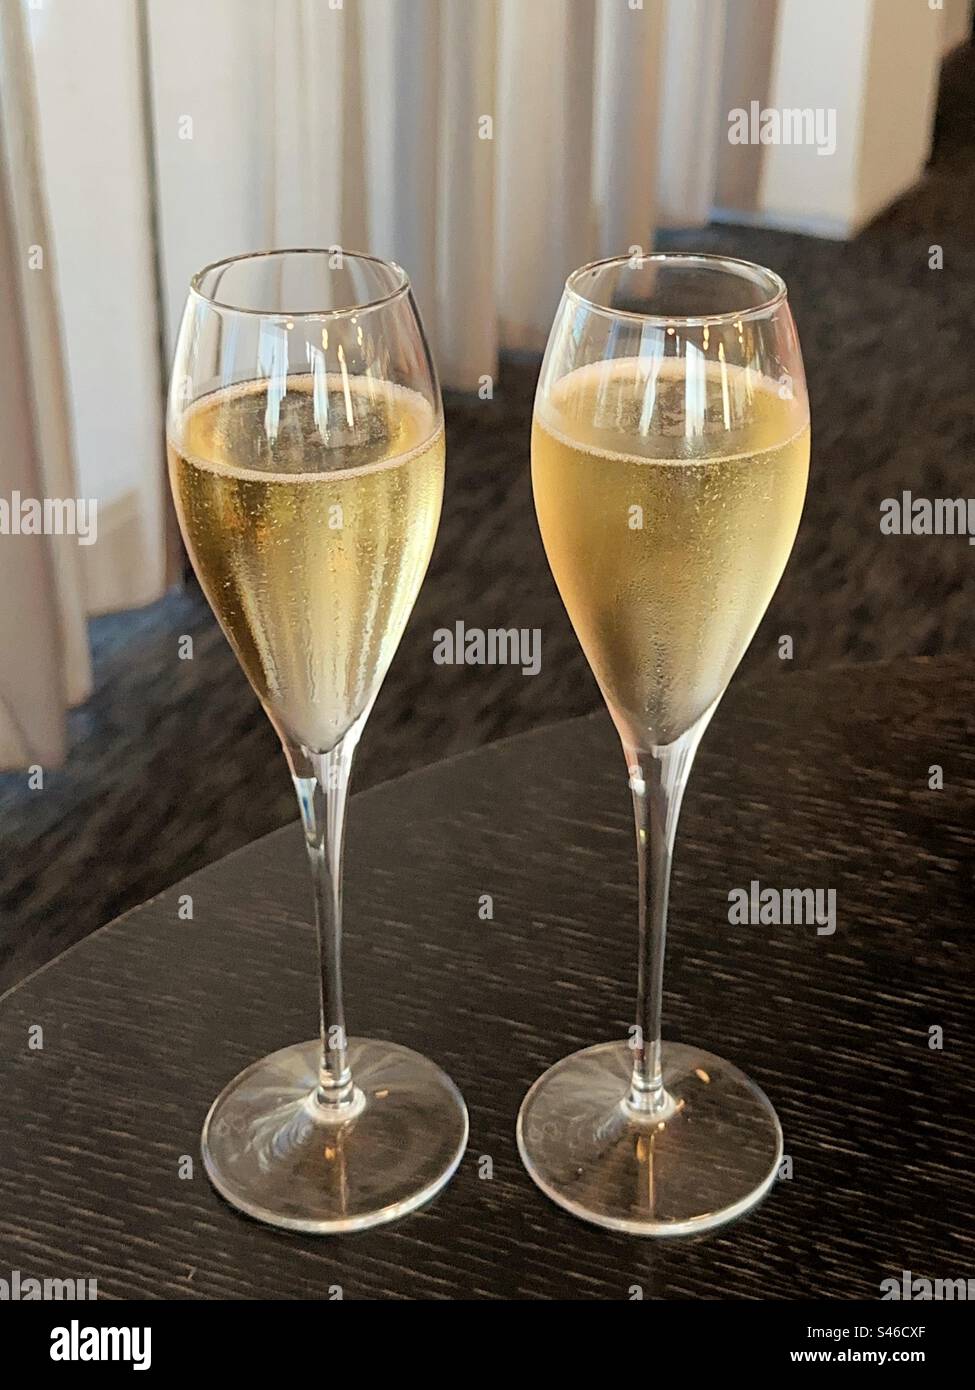 Two flute glasses of champagne on a table in a hotel lounge. No people. Stock Photo